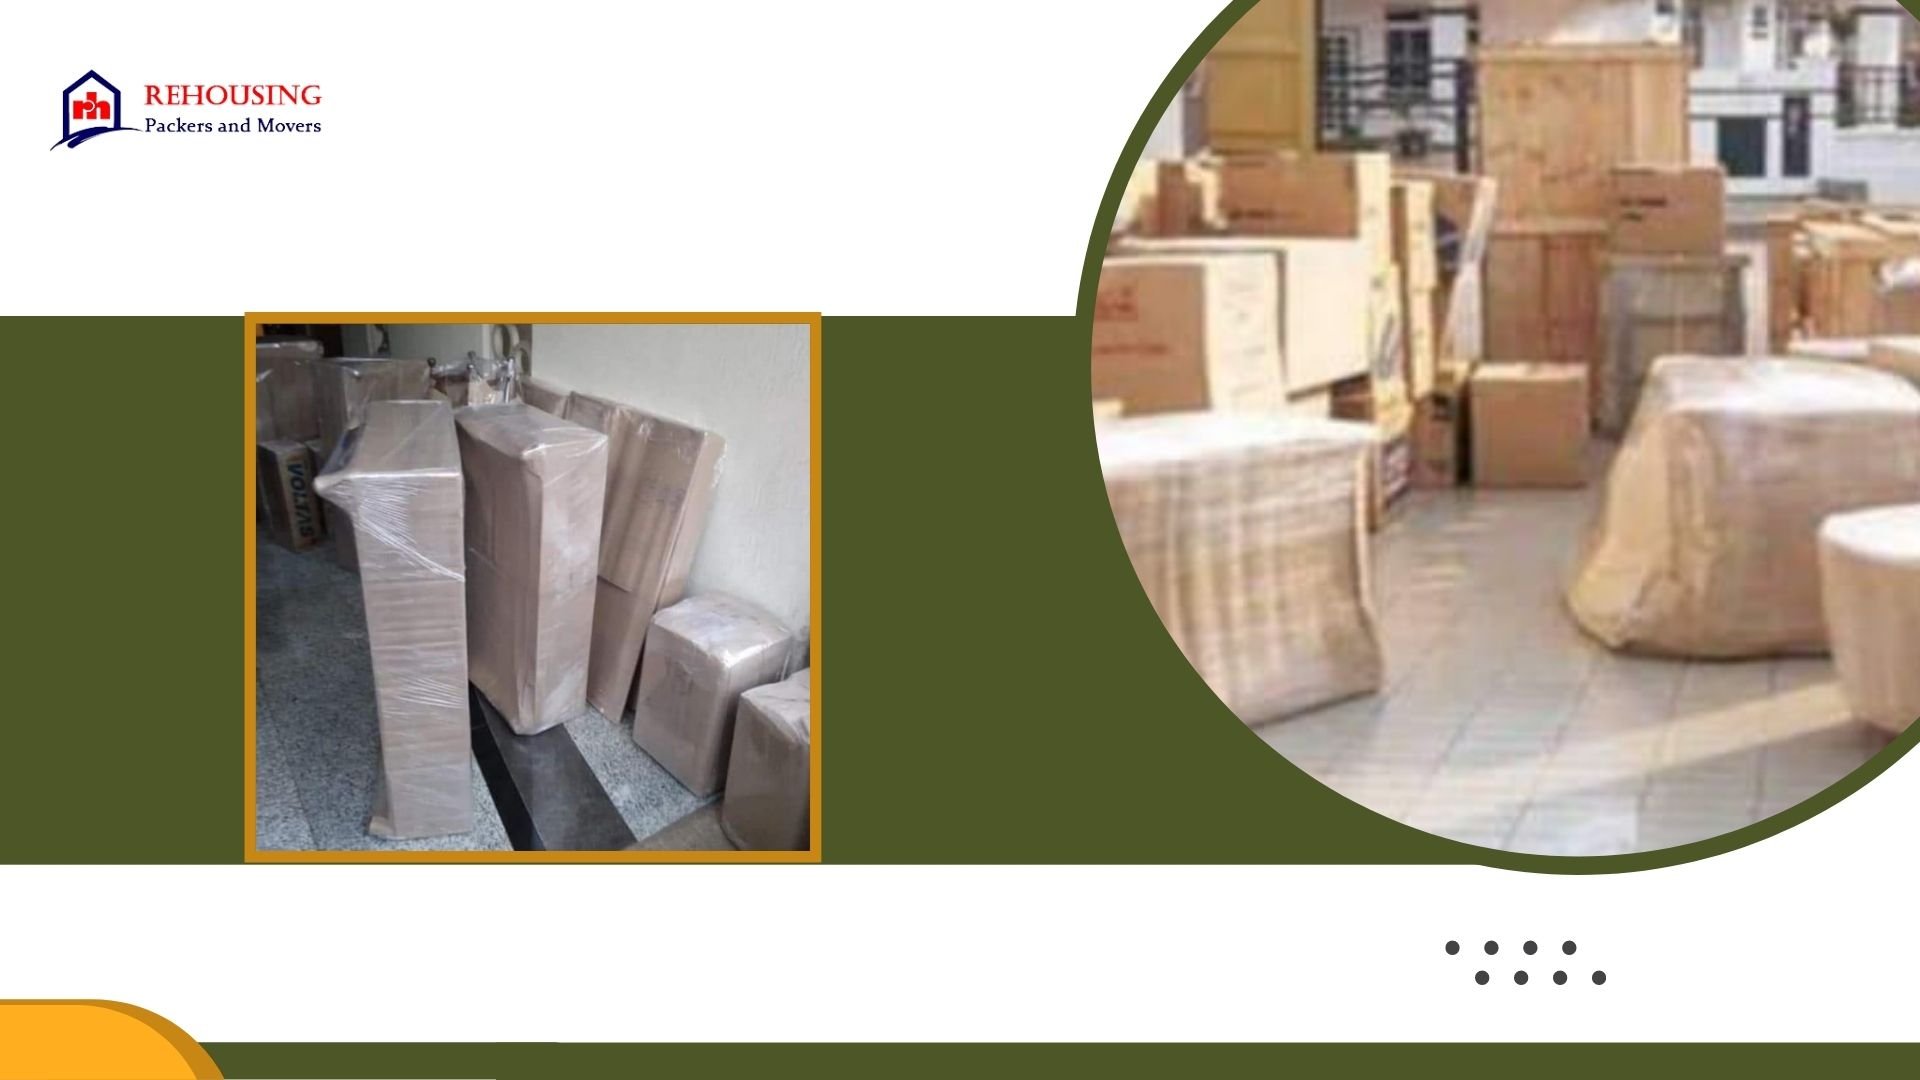 Packers and Movers from Ahmedabad to Gurgaon Cost